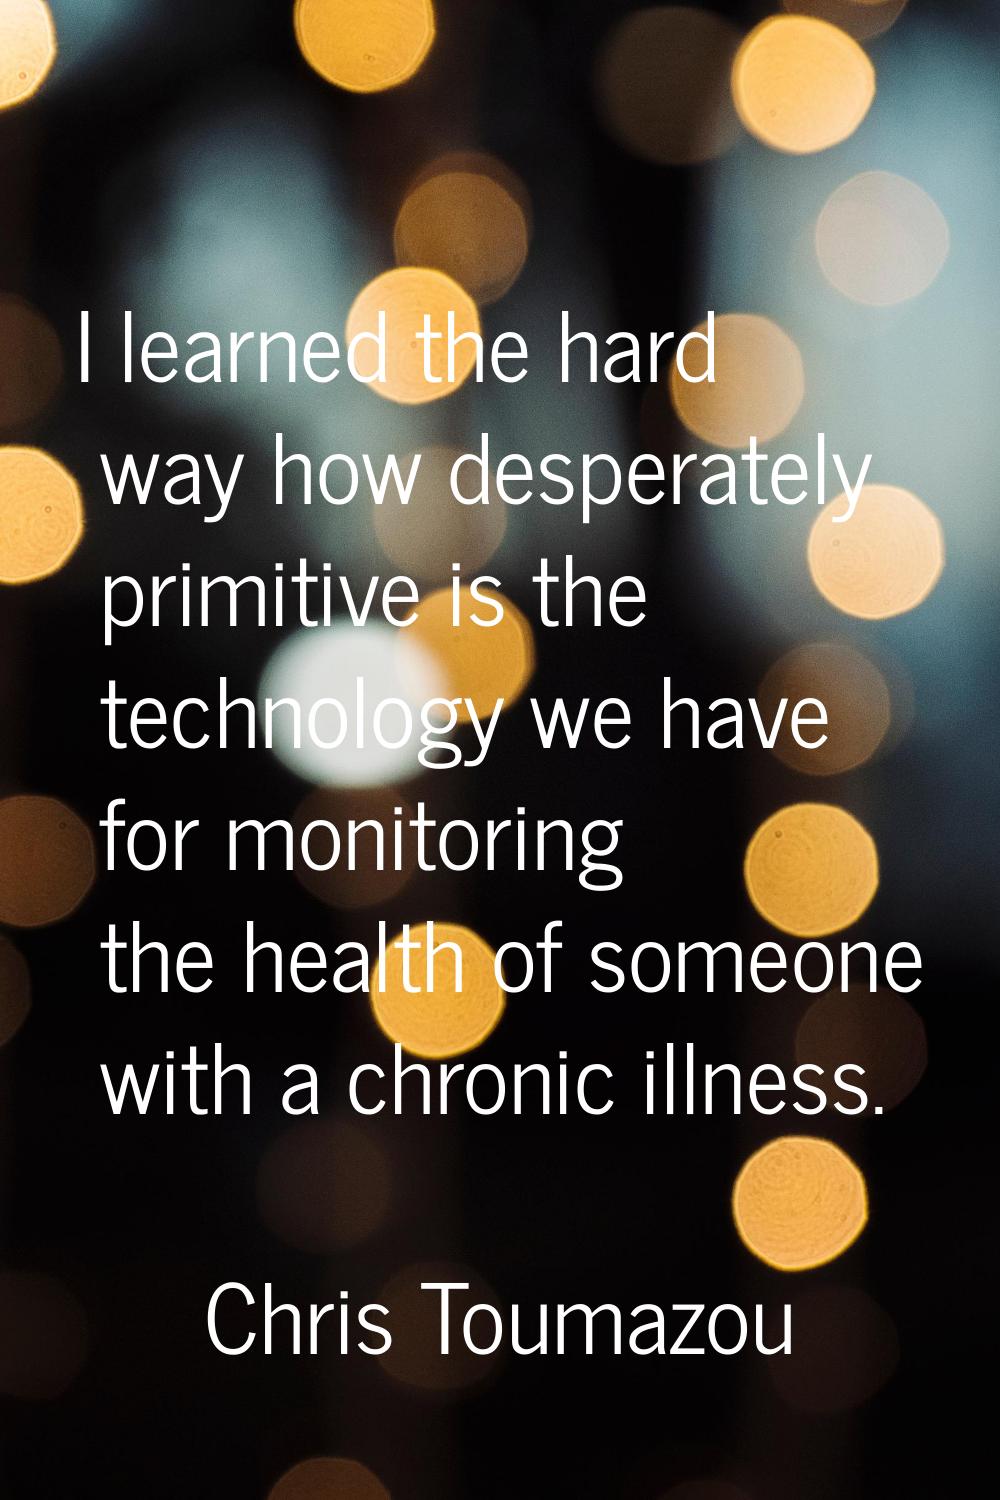 I learned the hard way how desperately primitive is the technology we have for monitoring the healt